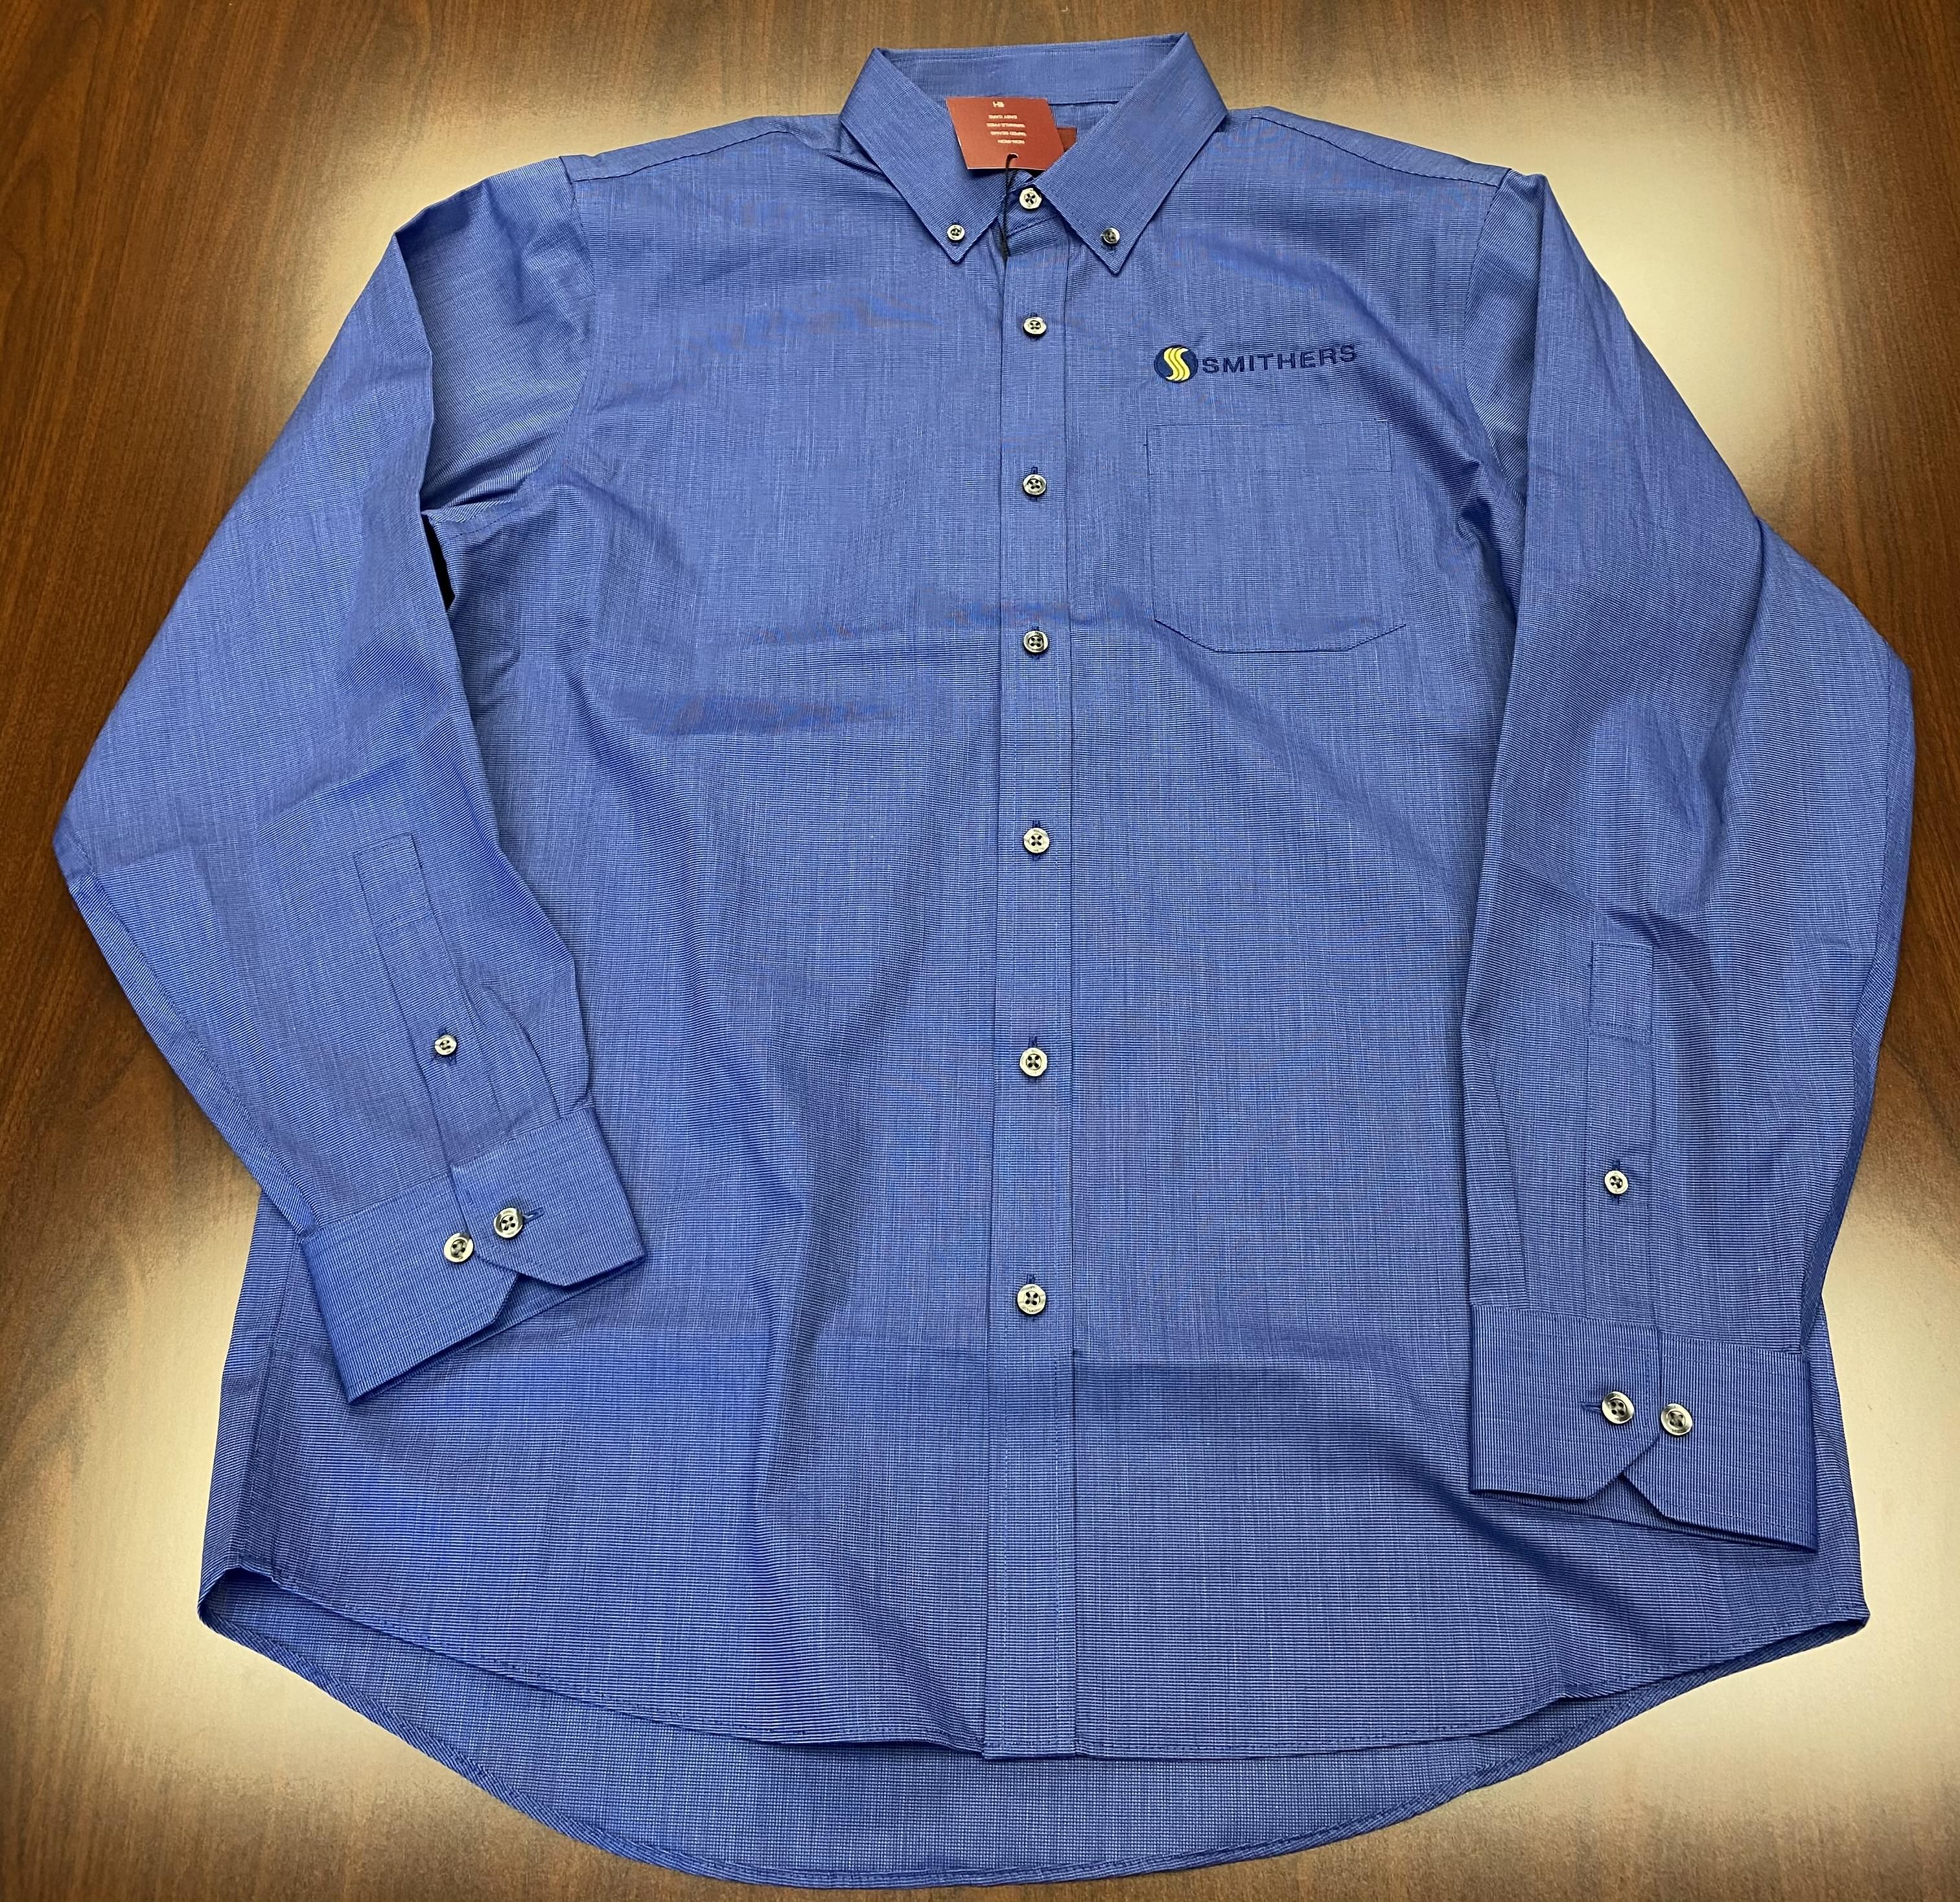 photo of blue men's dress shirt with multicolor Smithers logo